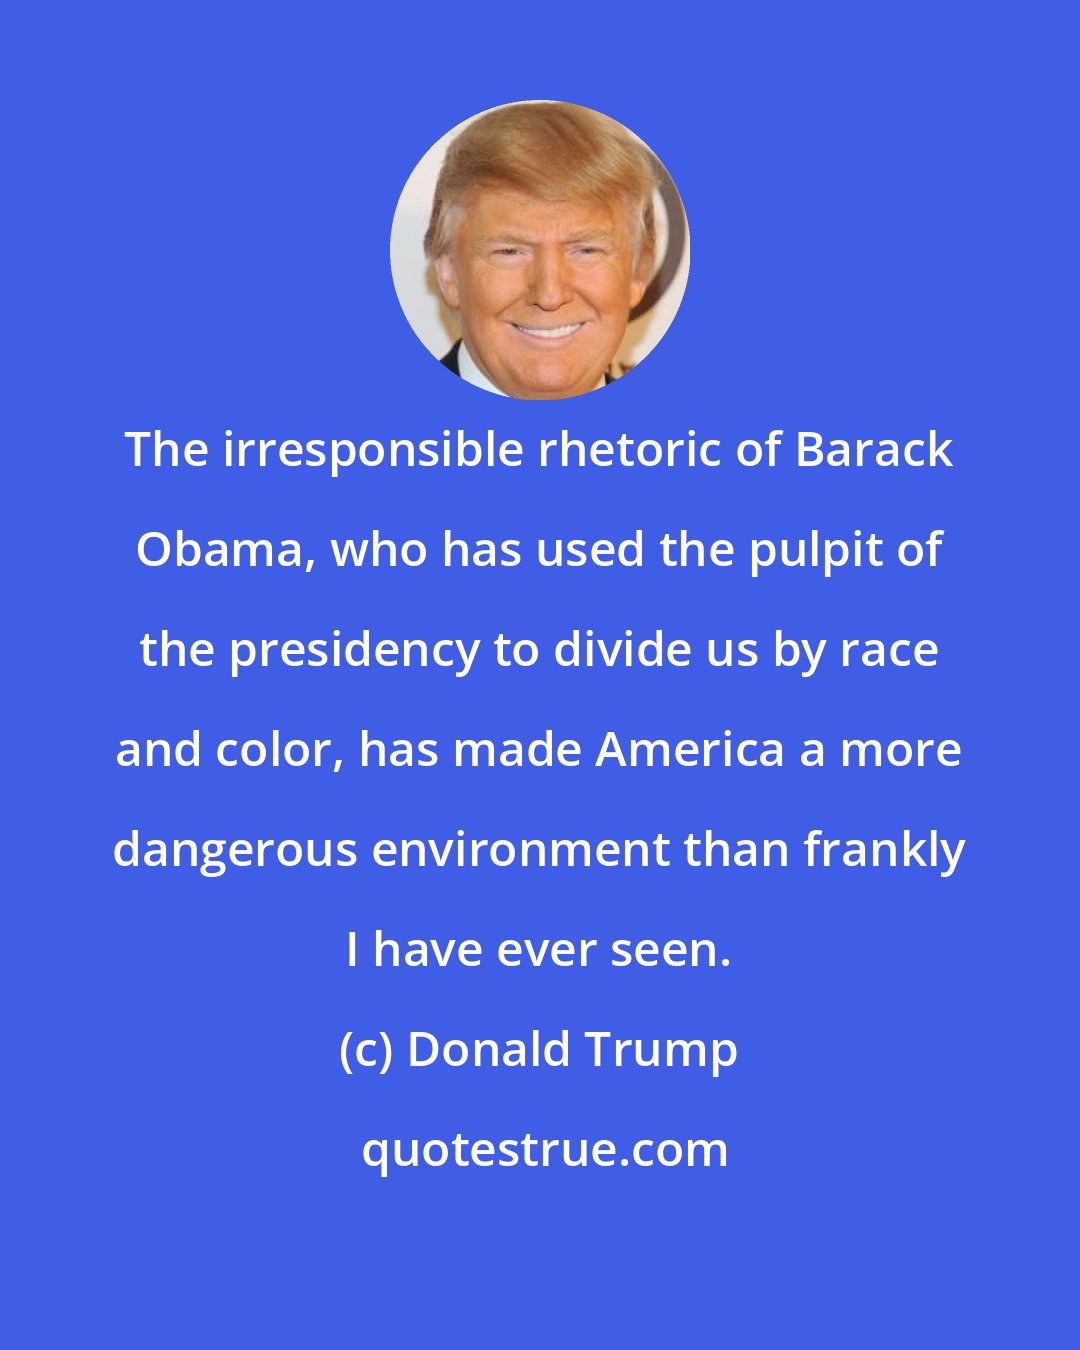 Donald Trump: The irresponsible rhetoric of Barack Obama, who has used the pulpit of the presidency to divide us by race and color, has made America a more dangerous environment than frankly I have ever seen.